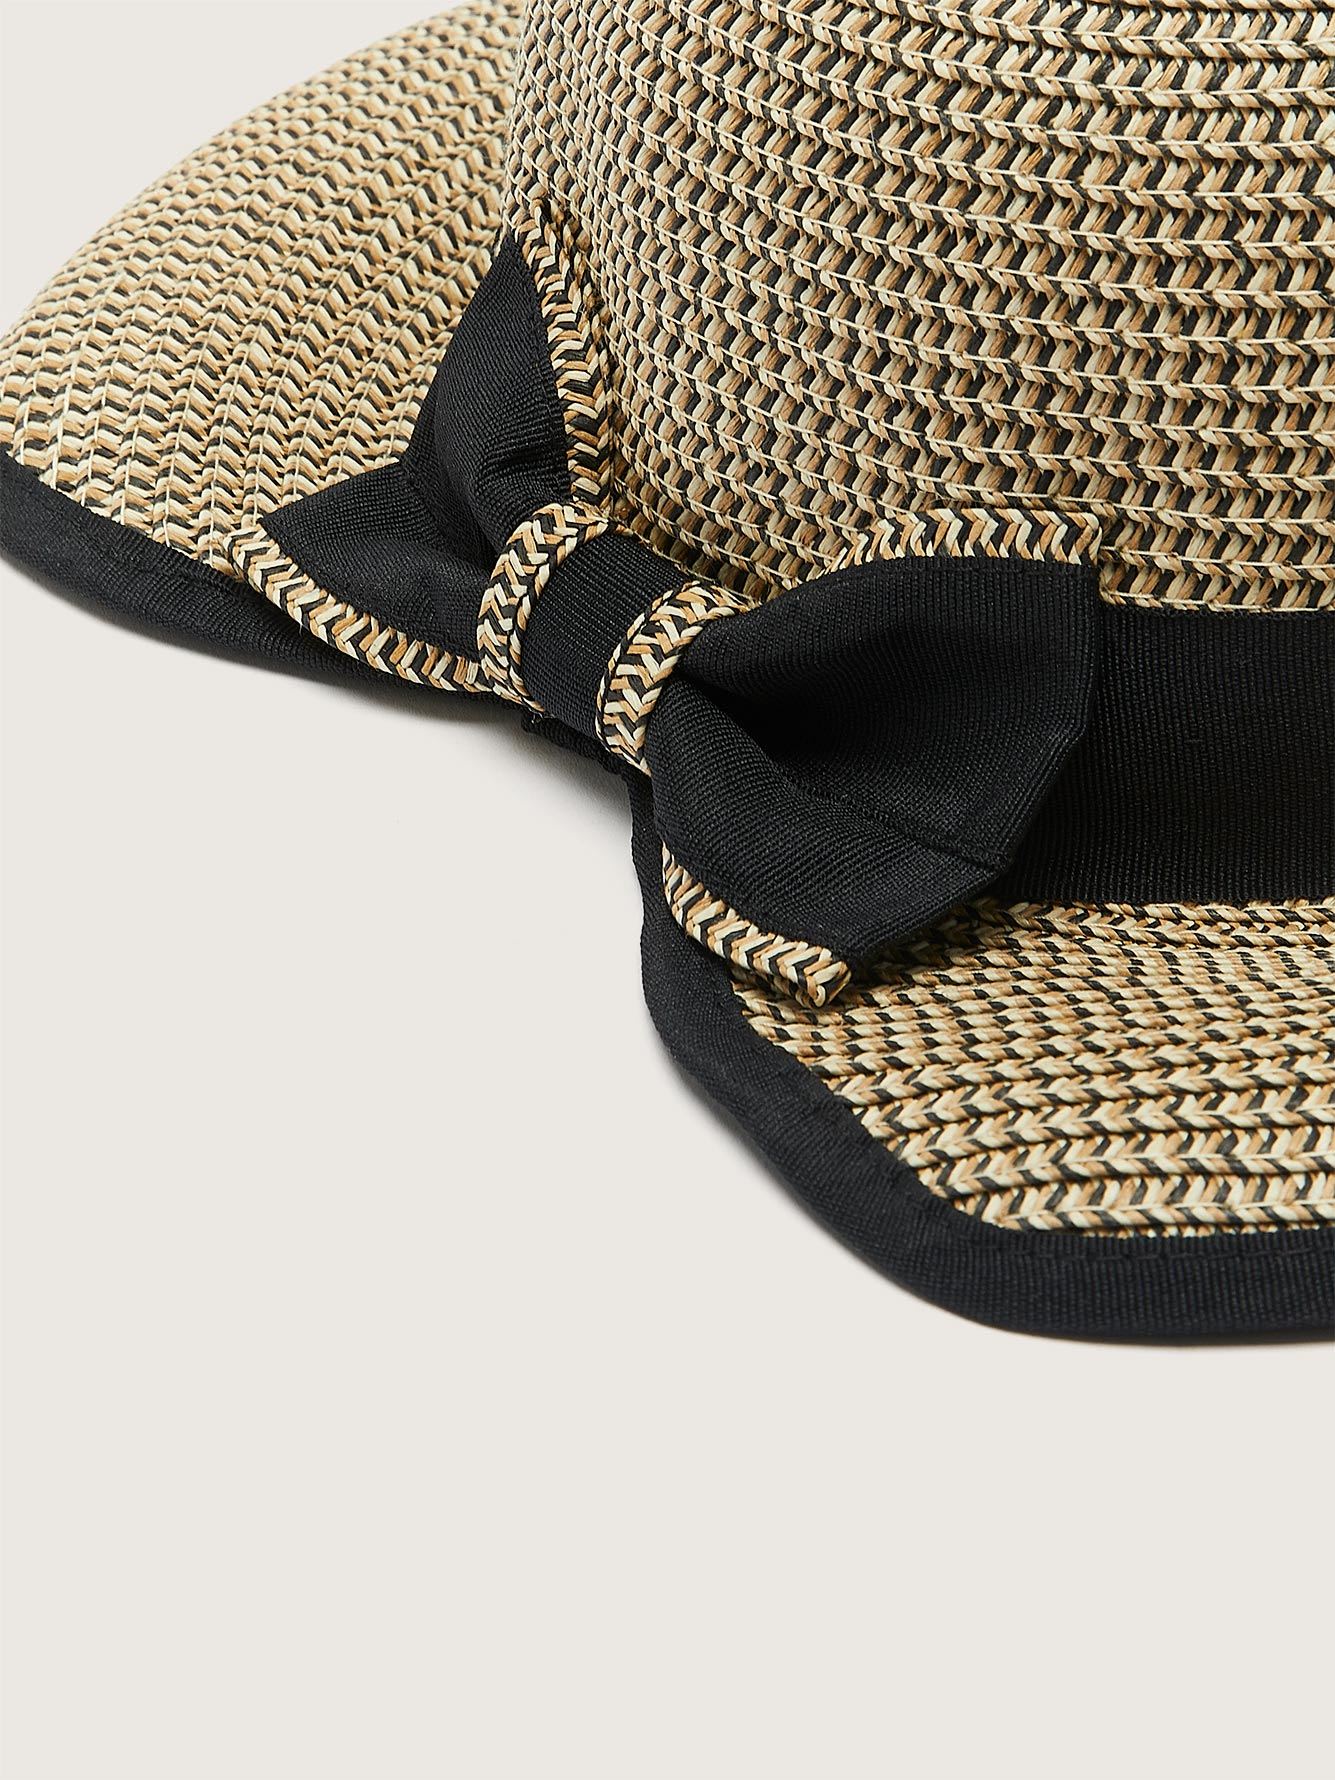 Two-Tone Straw Hat with Grosgrain Bow